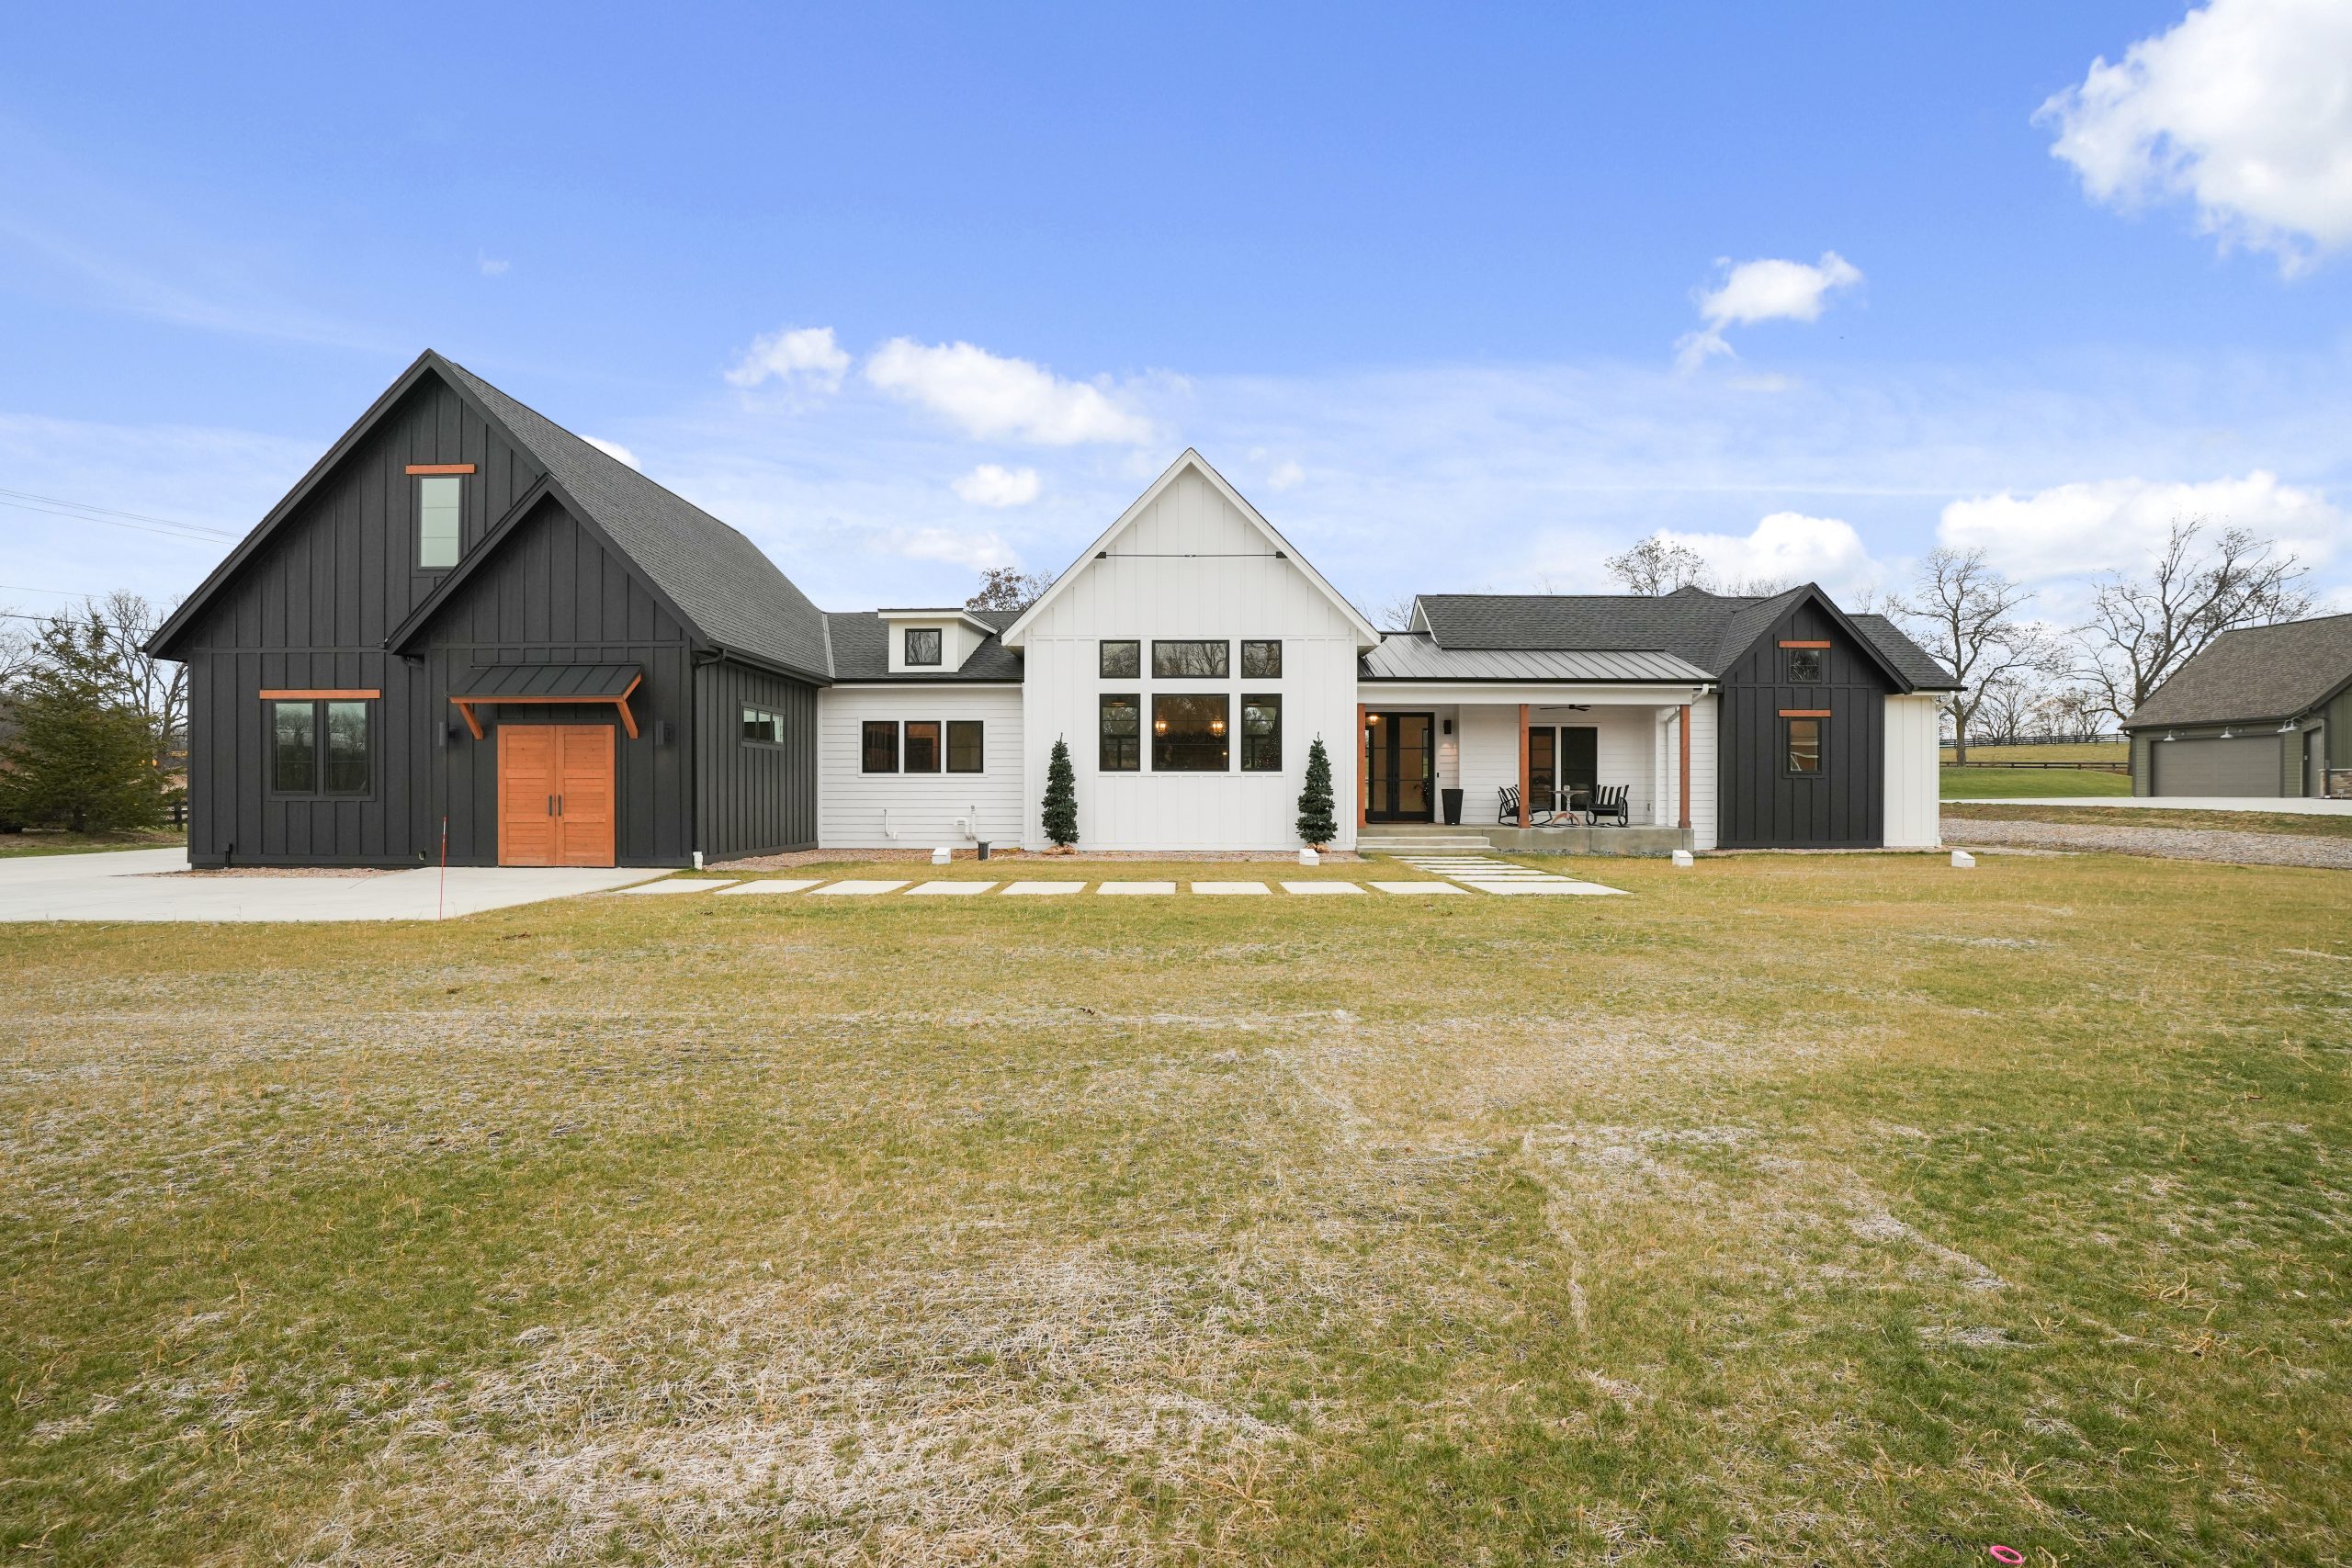 Modern farmhouse with mixed siding and attached garage.